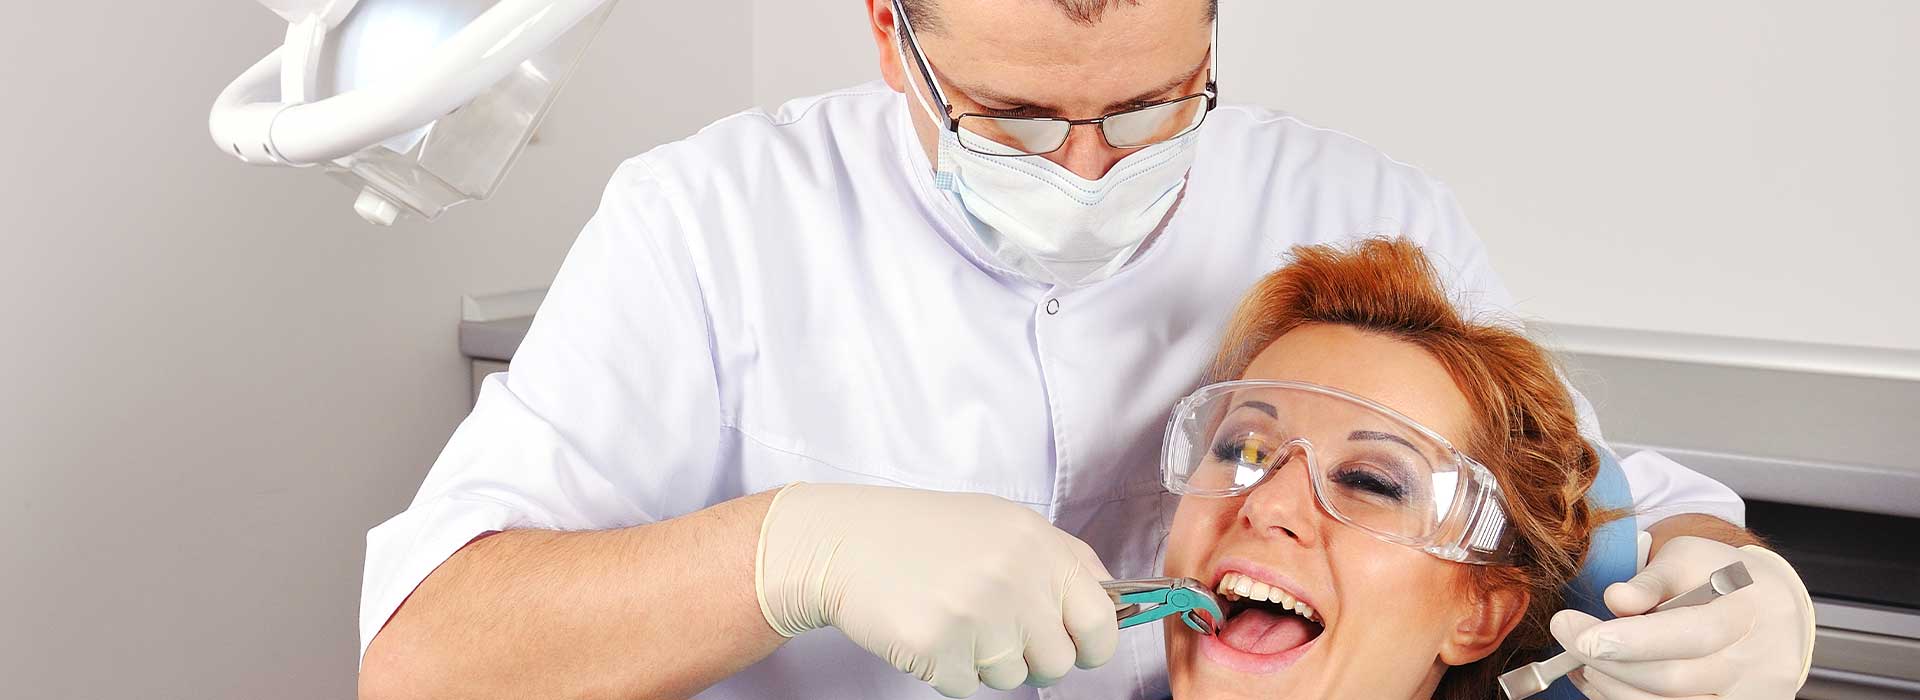 Dentist doing a dental extraction procedure for his patient